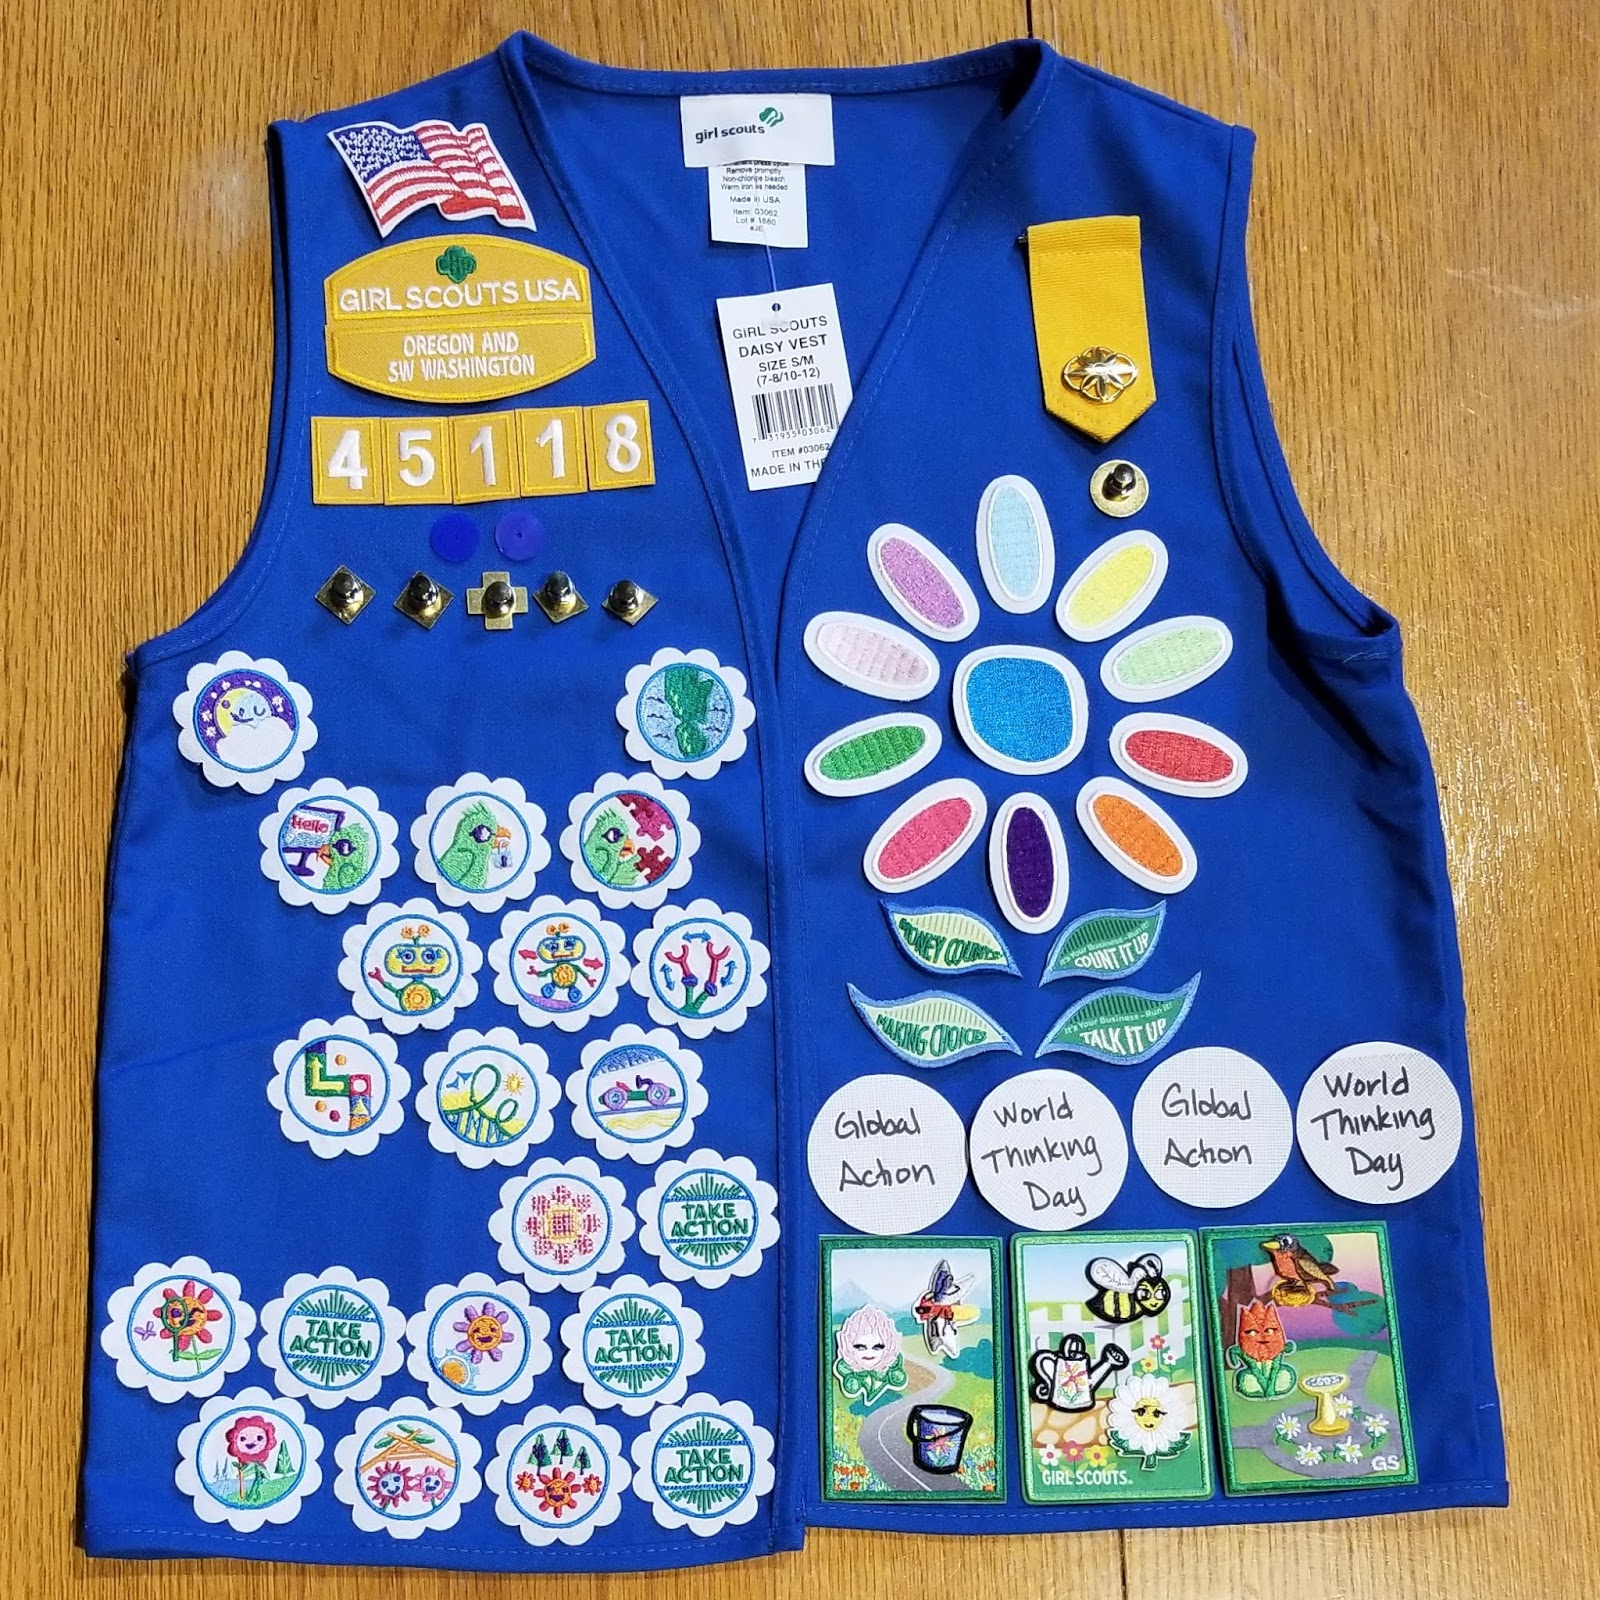 Daisies vest badge placement shadow doll forex